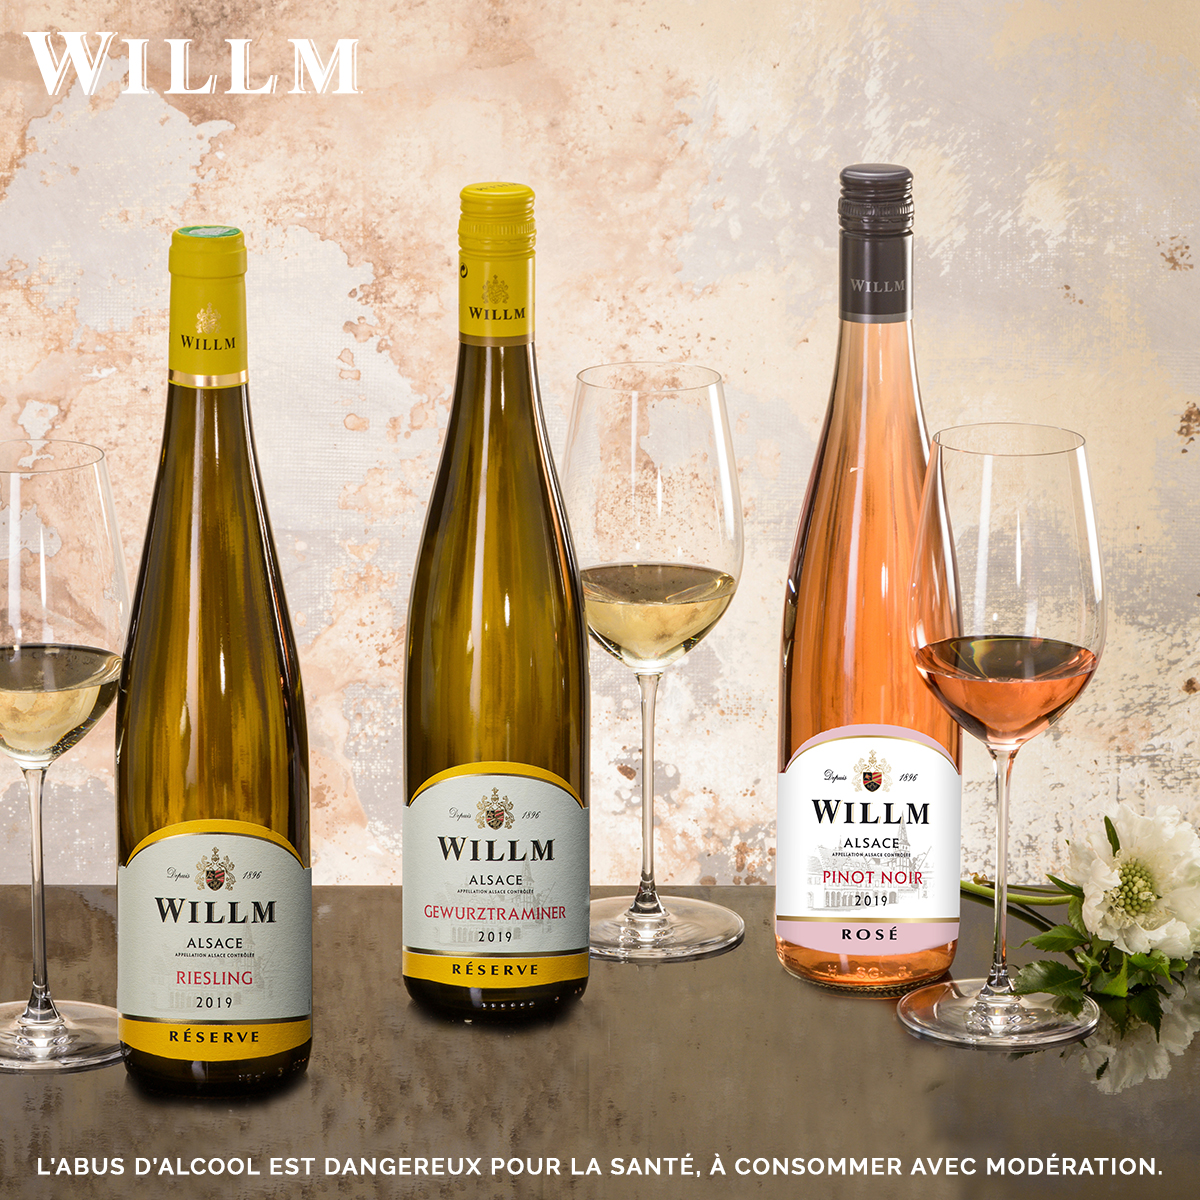 Known for their complexity, purity of fruit and authenticity, these #wines are the product of years of hands-on experience and know-how passed down from one #generation to the next. #drinkalsace #alsacerocks #alsacewillm #willm #alsace #riesling #gewurztraminer #pinotnoir